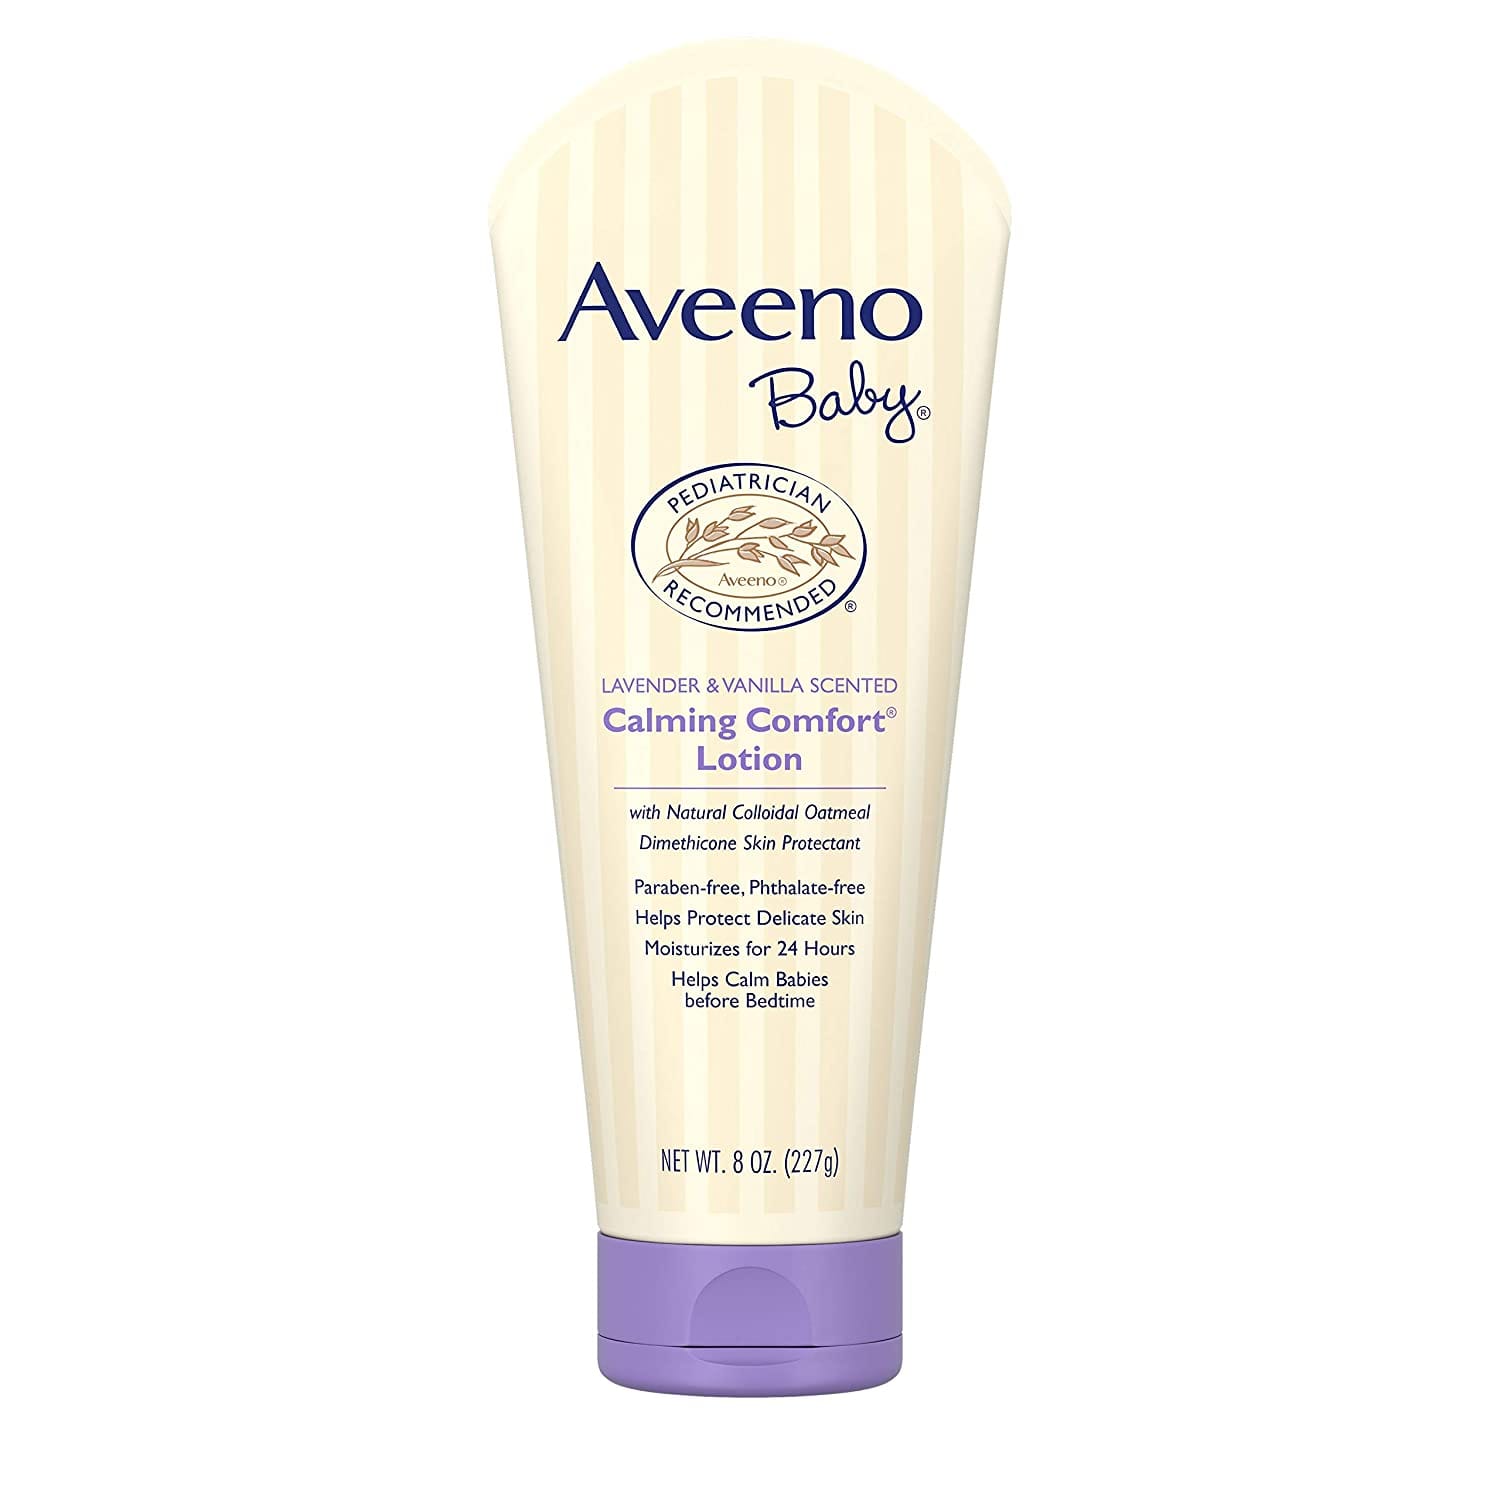 Aveeno Baby Calming Comfort Moisturizing Lotion with Relaxing Lavender & Vanilla Scents, Non-Greasy Body Lotion with Natural Oatmeal & Dimethicone, Paraben- & Phthalate-Free, 8 fl. oz - 38137003645